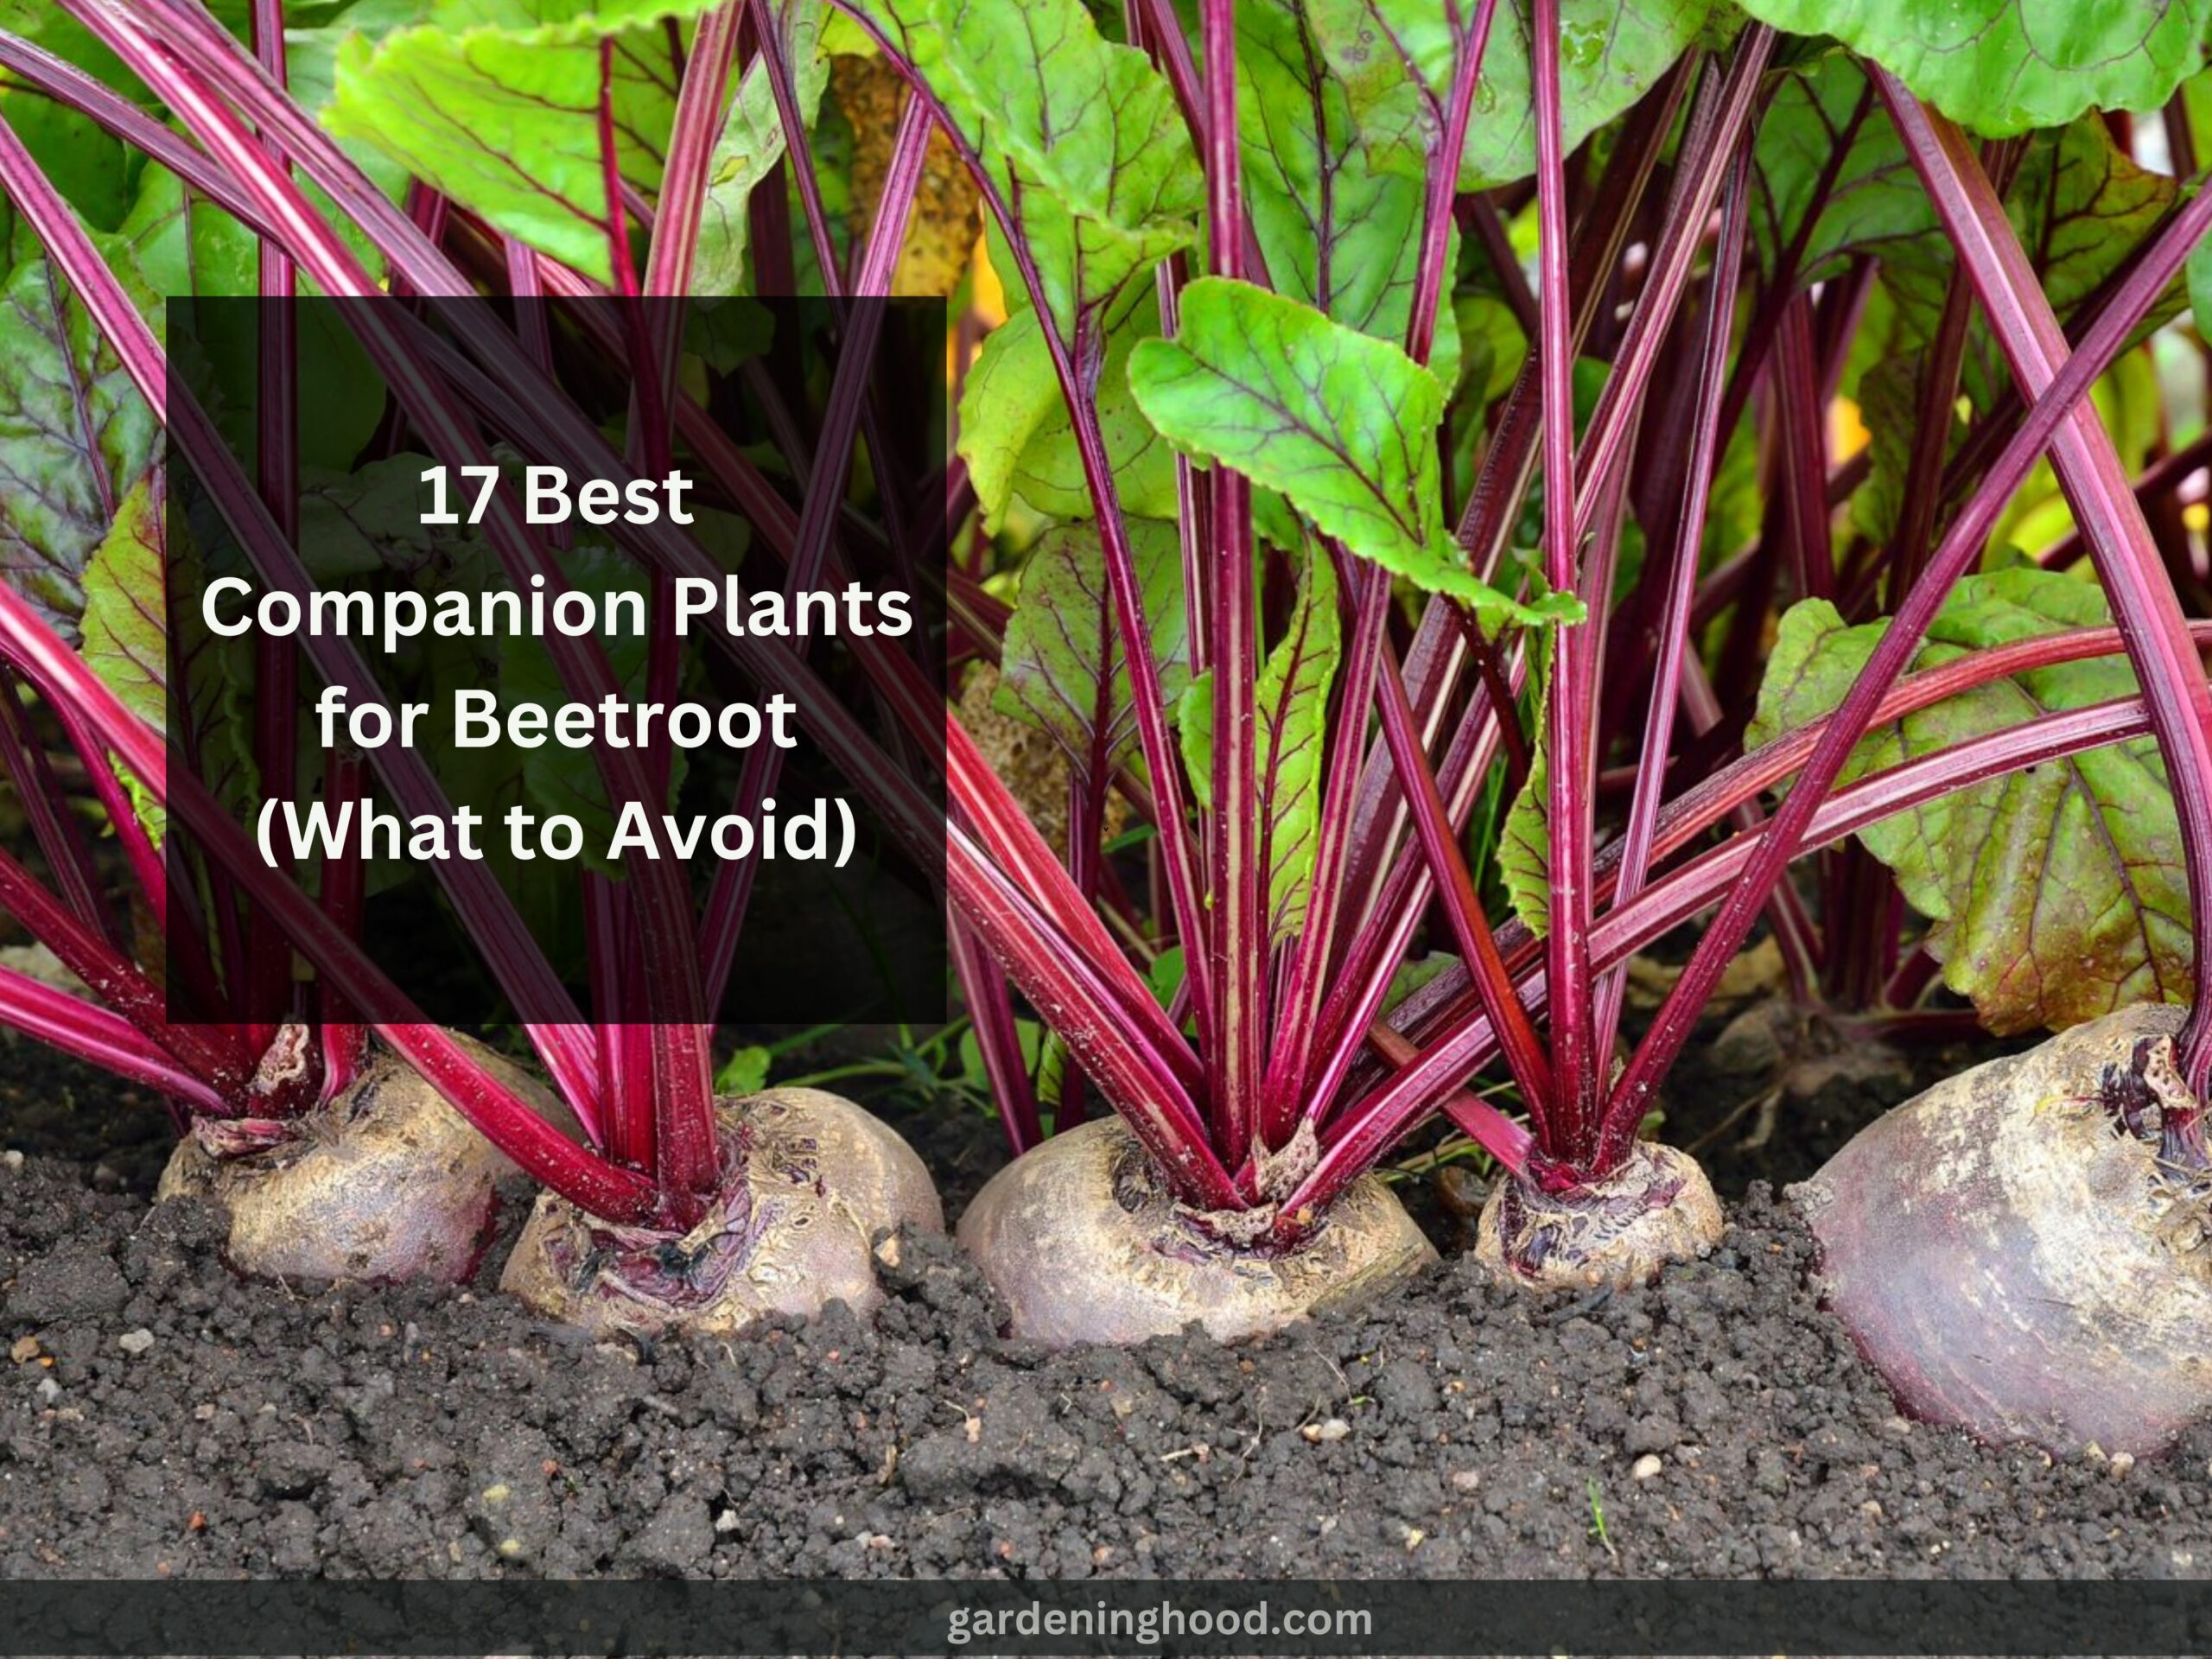 17 Best Companion Plants for Beetroot (What to Avoid)